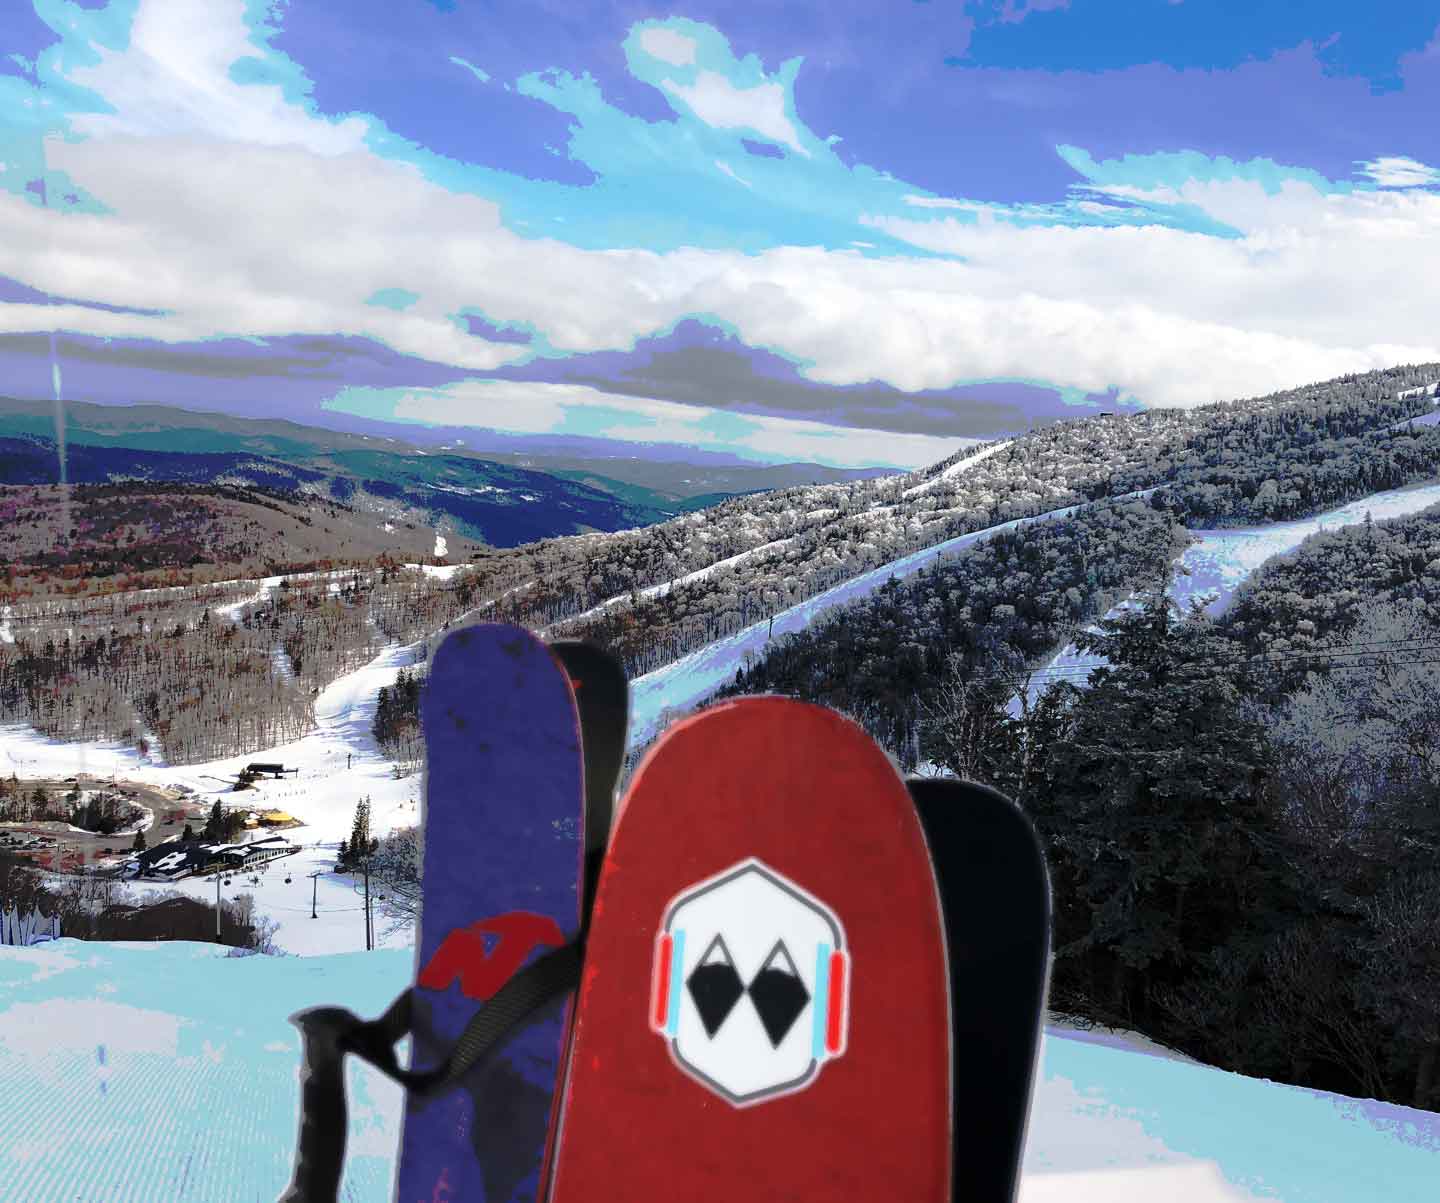 The view of Killington Mountain Resort from the Highline trail with skis